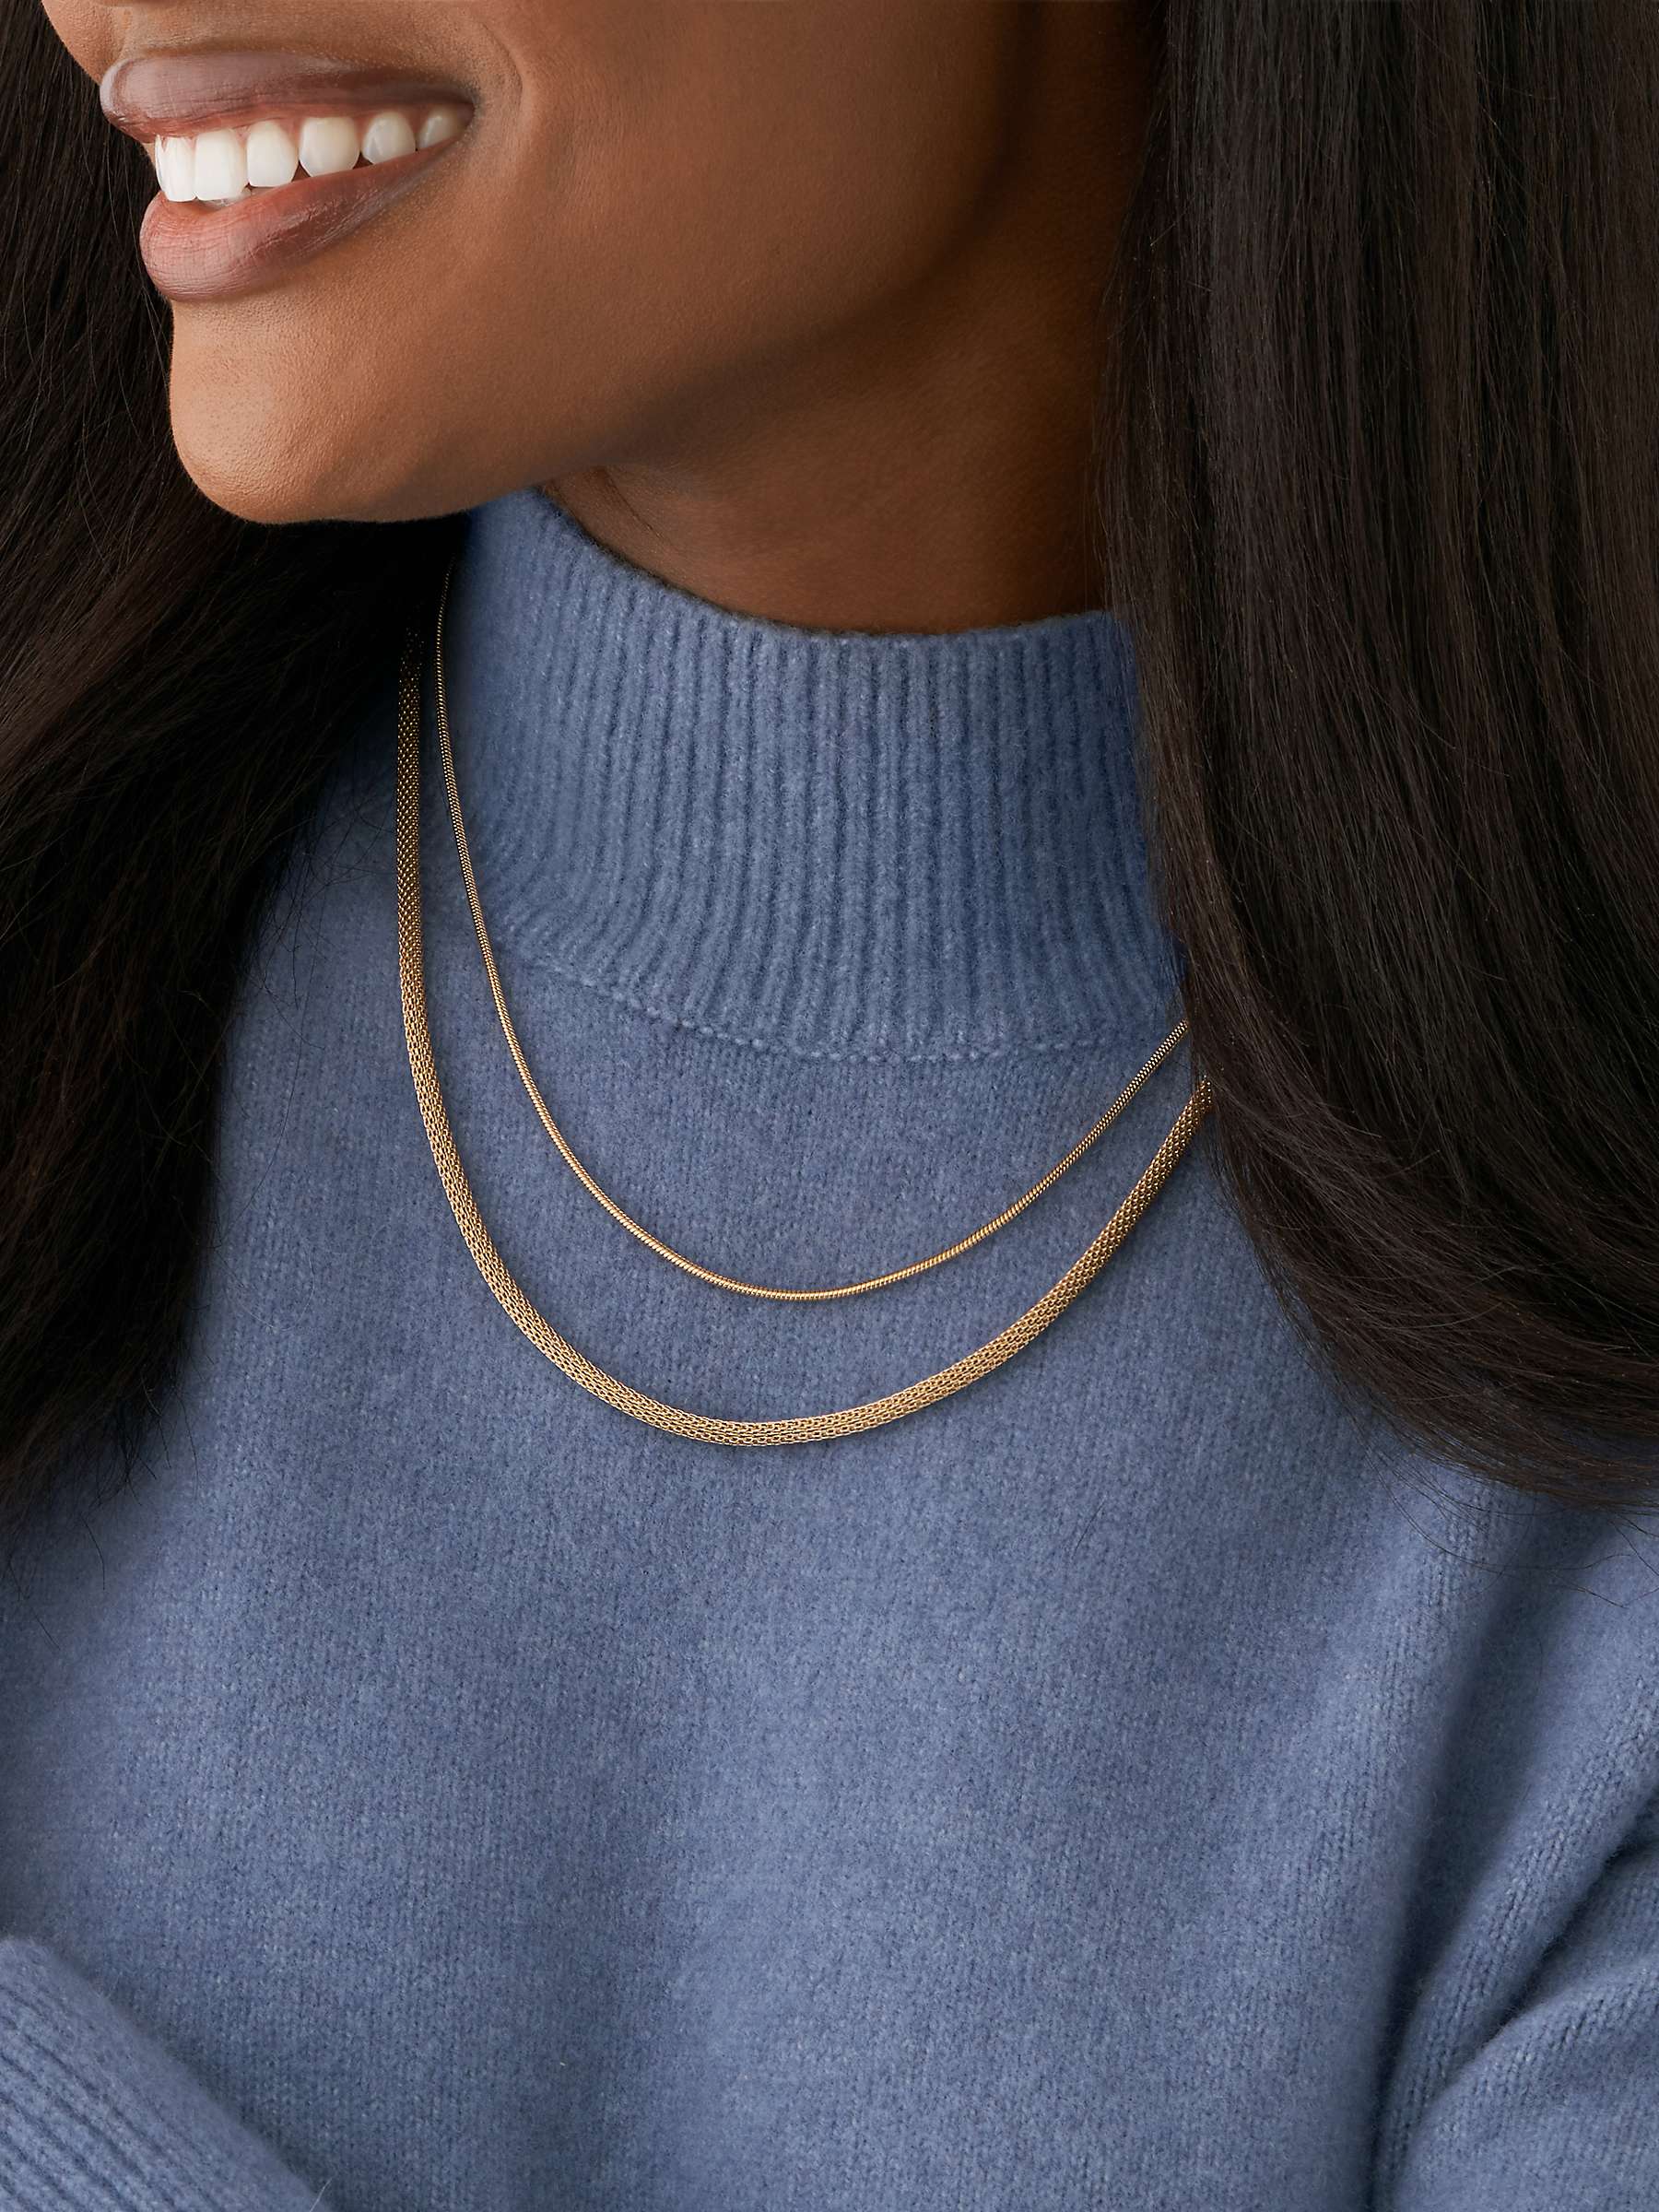 Buy Skagen Layered Chain Necklace, Gold Online at johnlewis.com